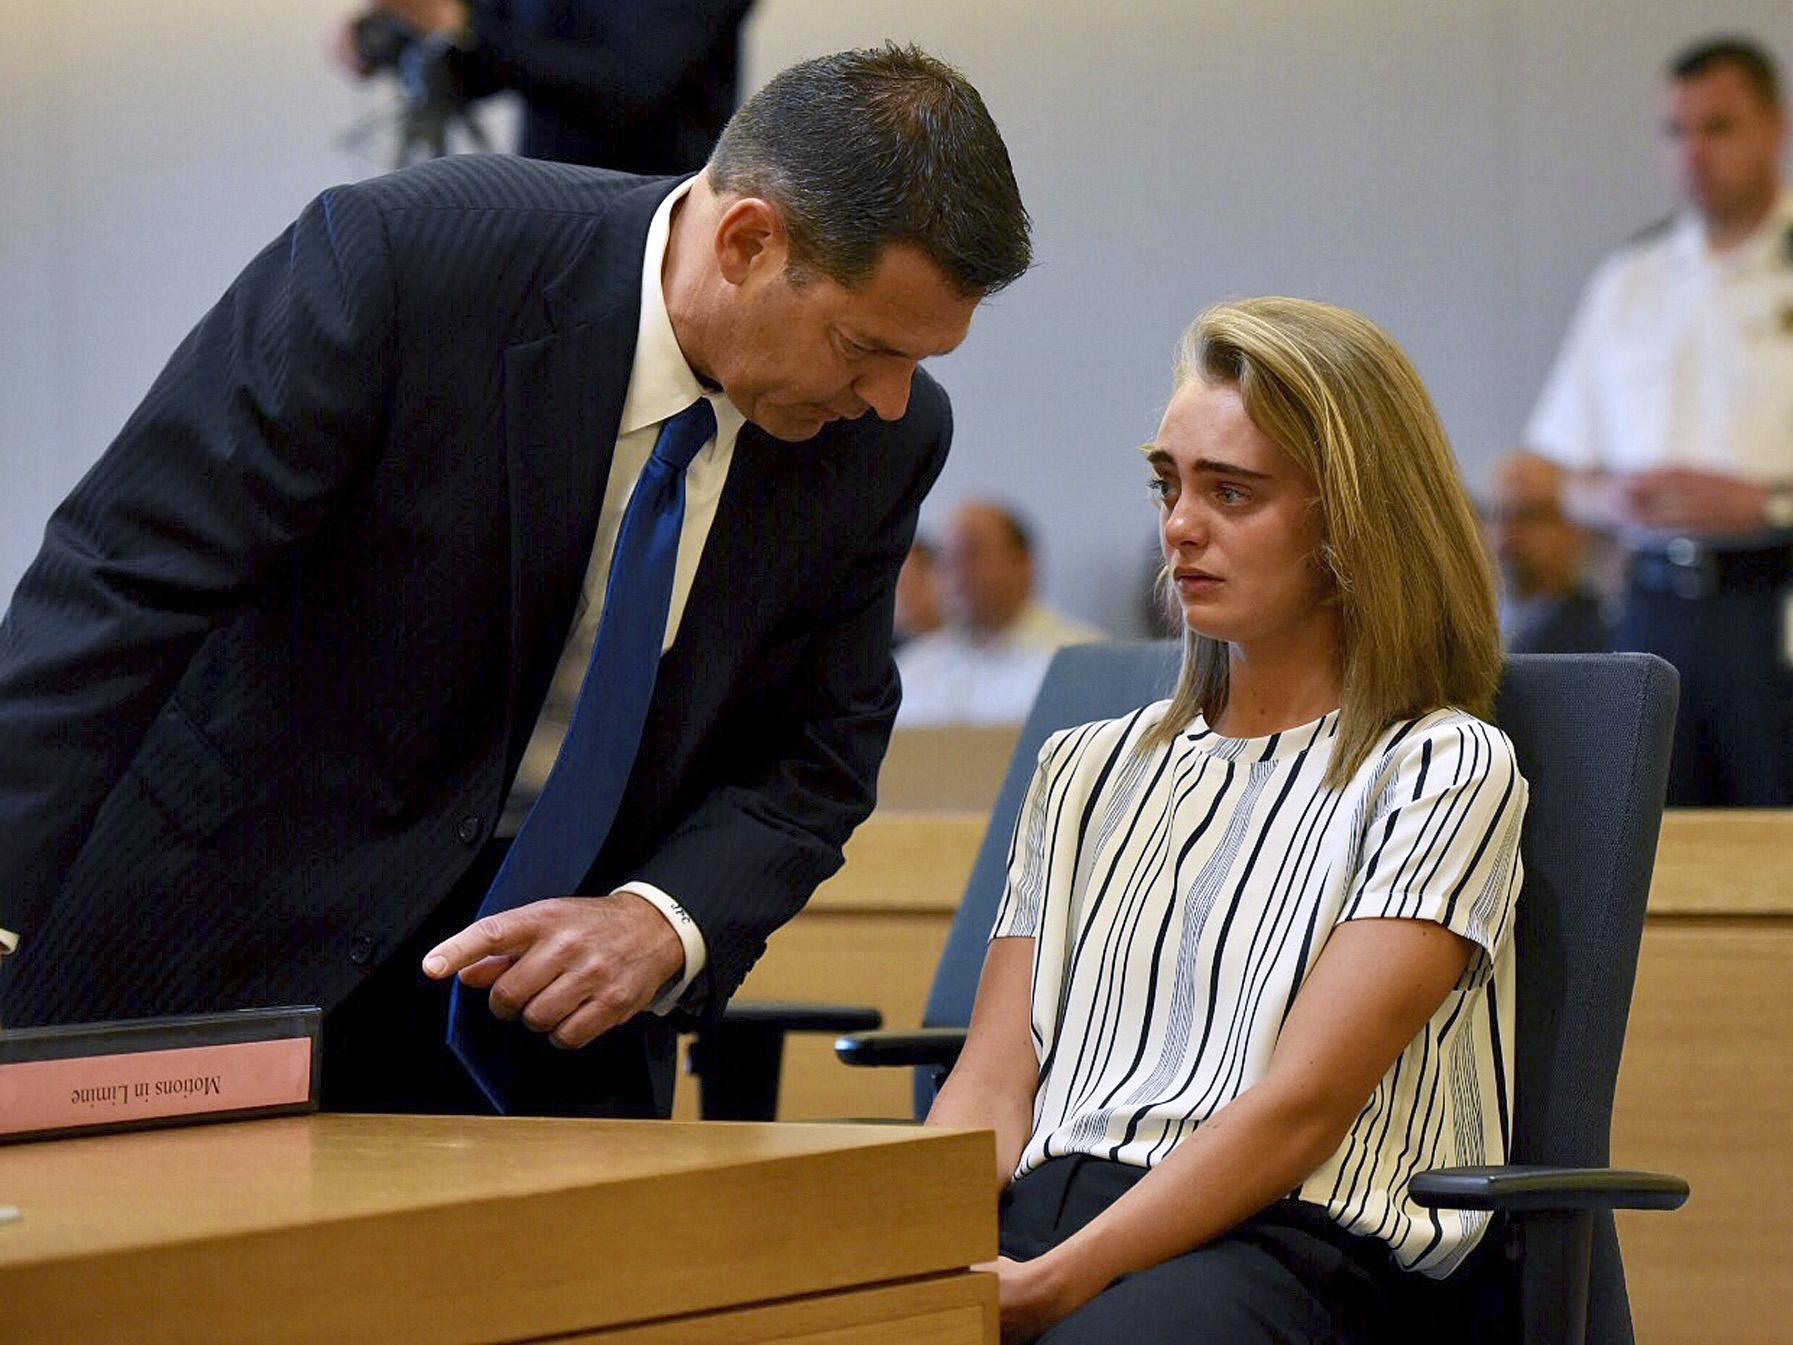 Defence lawyer Joseph Cataldo talks to his client, Michelle Carter, during the trial